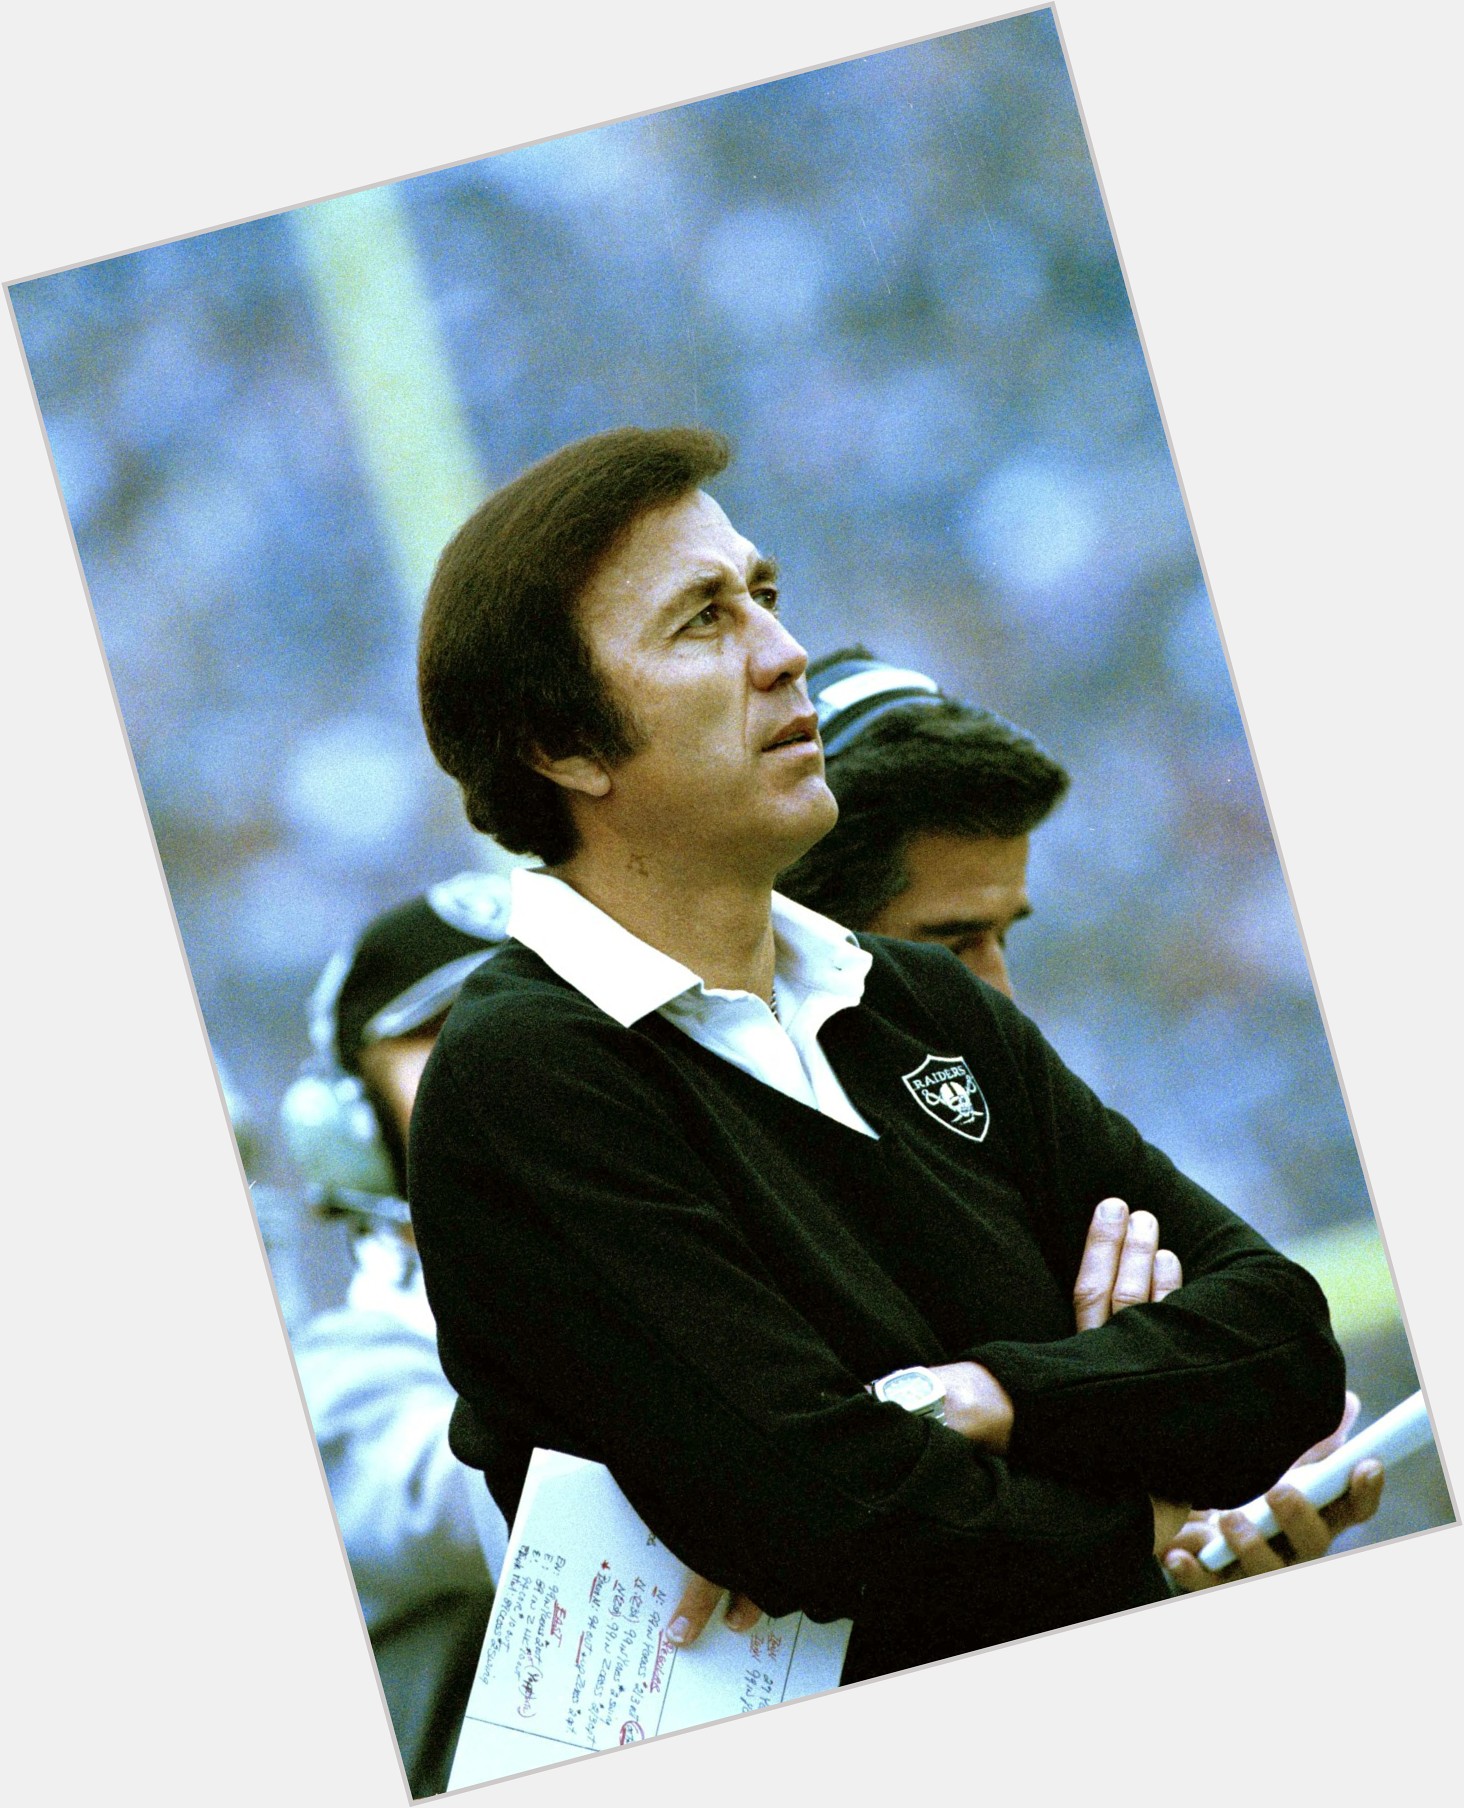 Http://fanpagepress.net/m/T/Tom Flores Dating 2